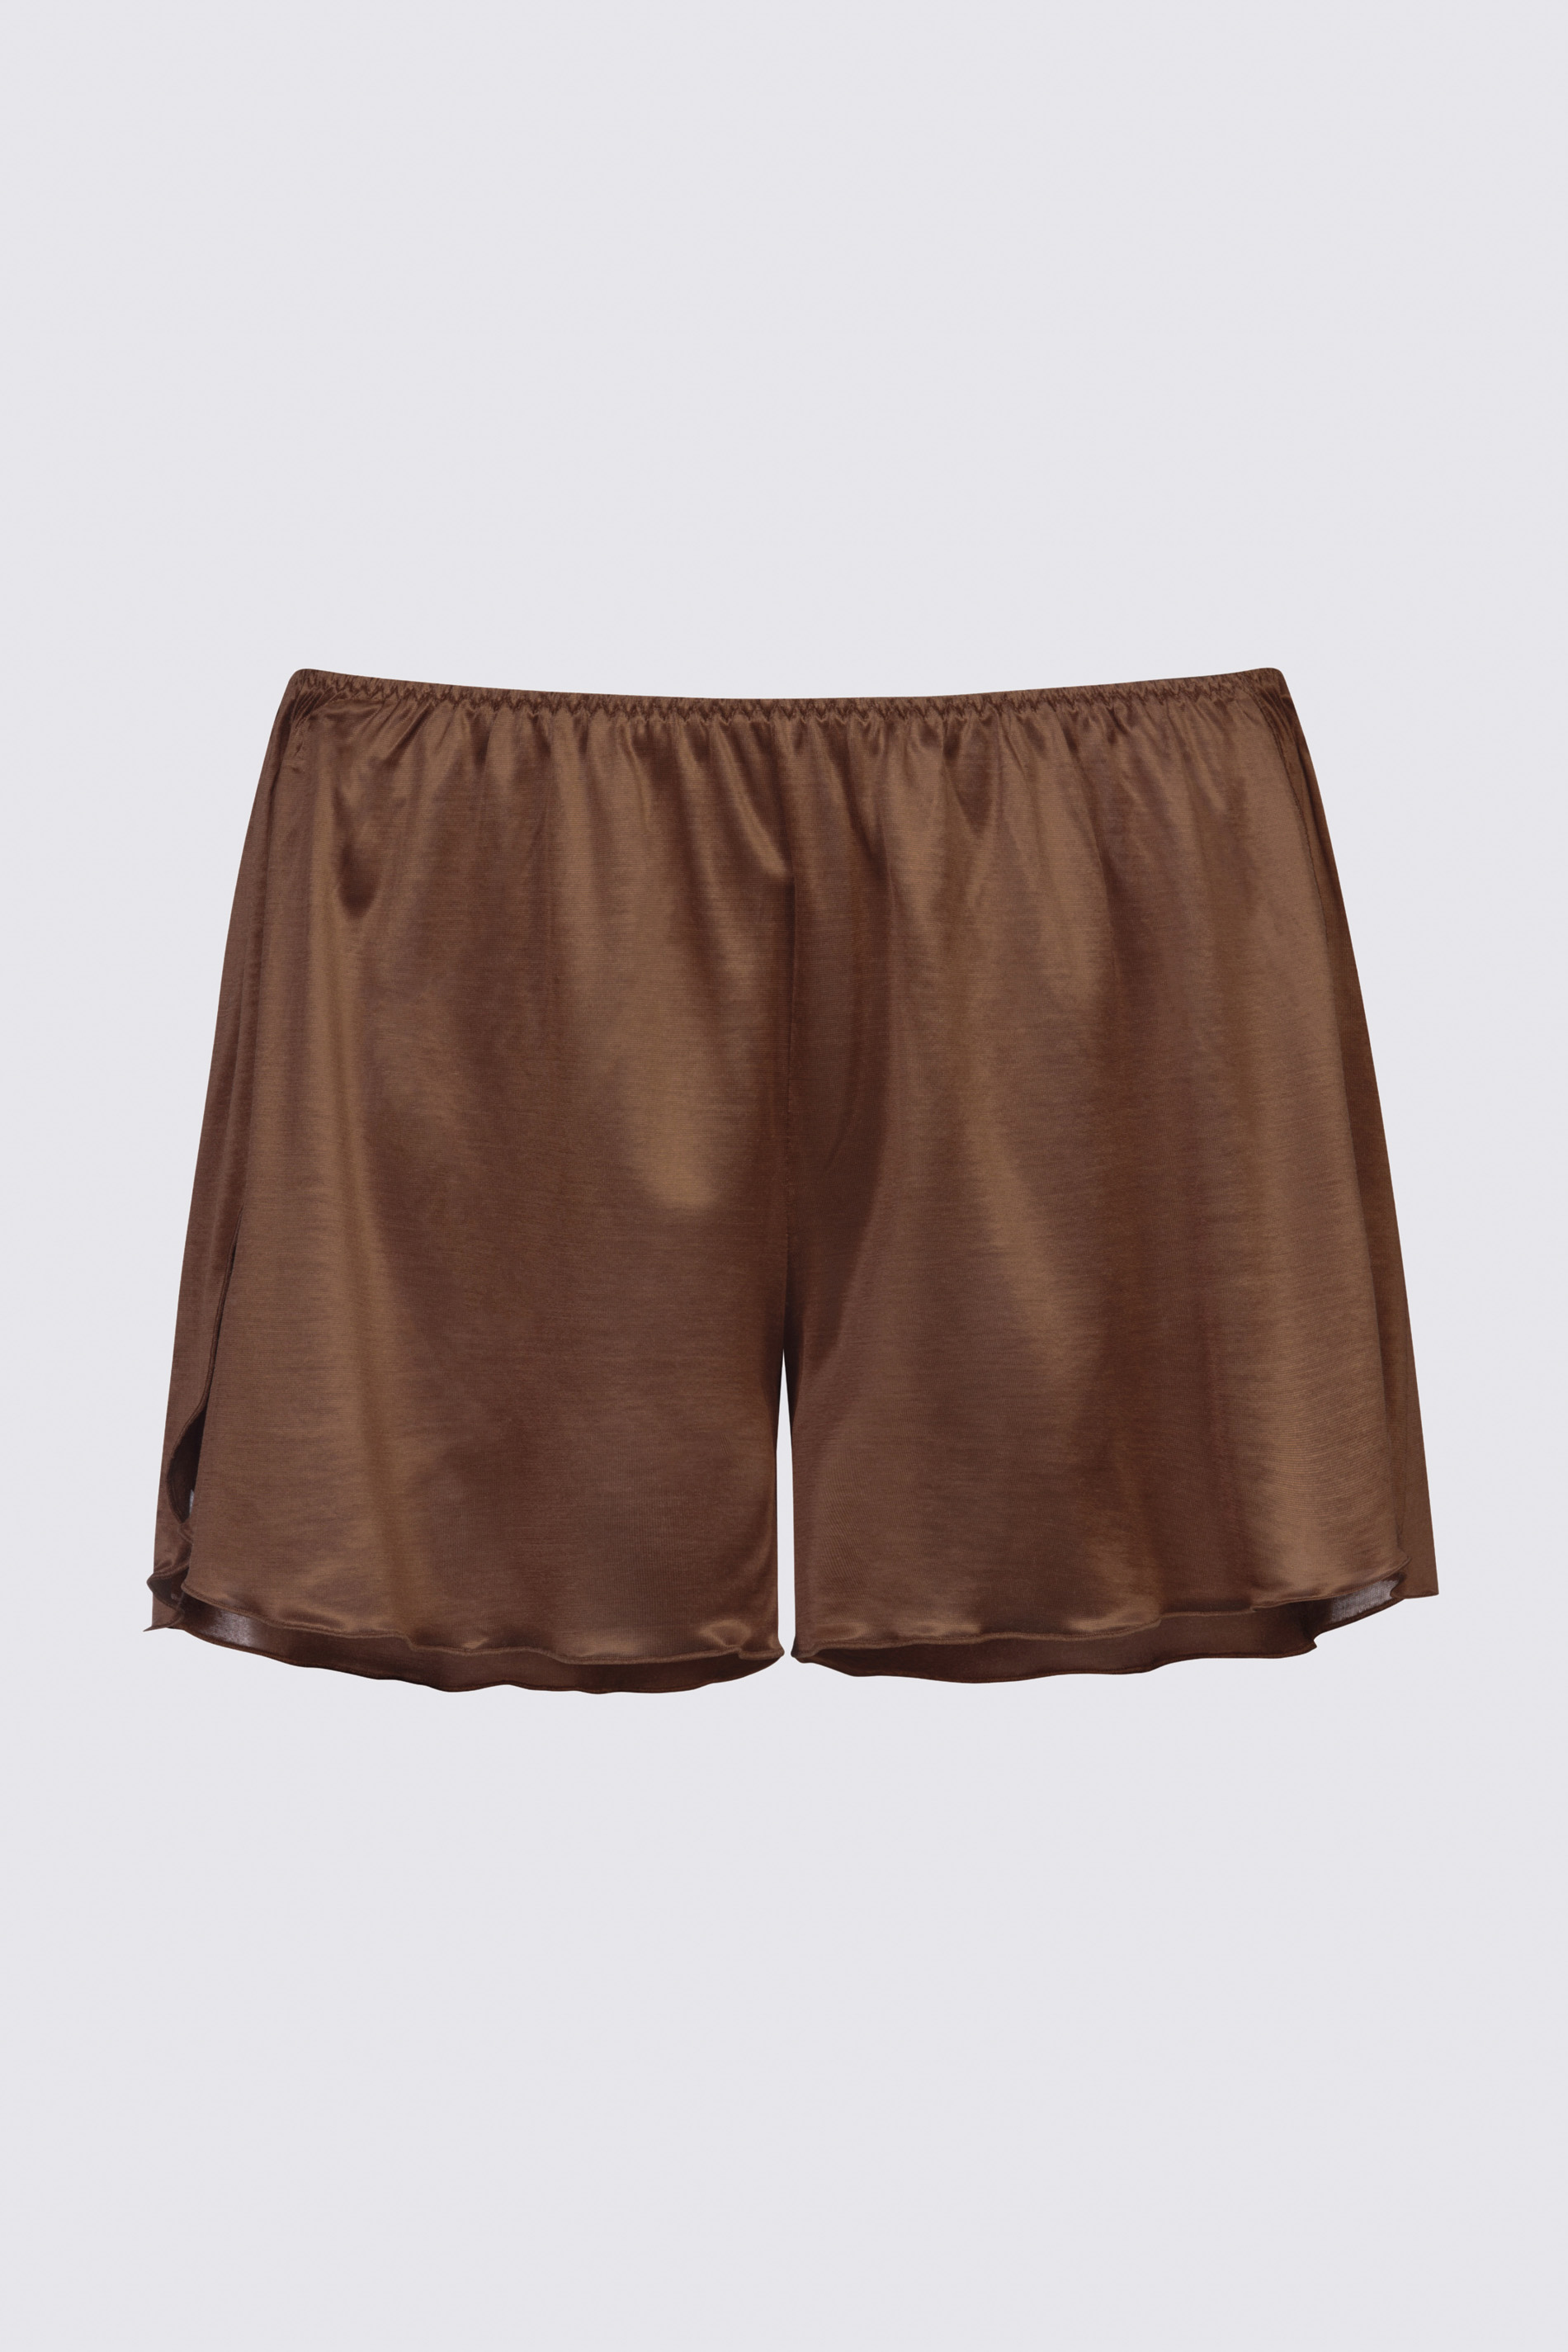 French knickers Espresso Serie Coco Uitknippen | mey®